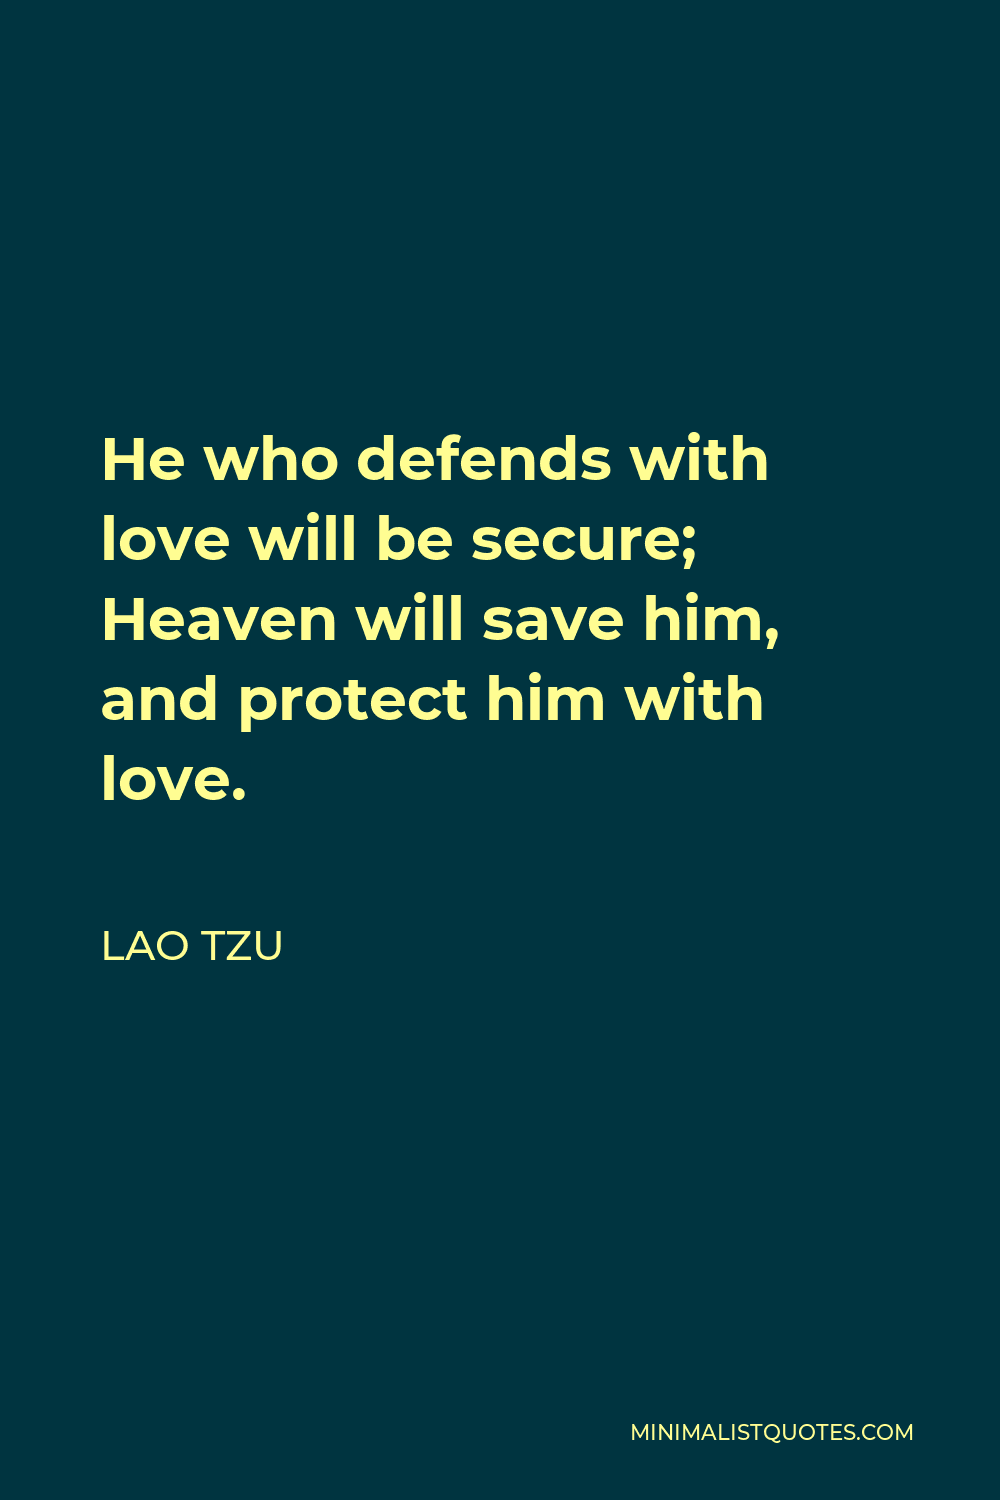 Lao Tzu Quote - He who defends with love will be secure; Heaven will save him, and protect him with love.